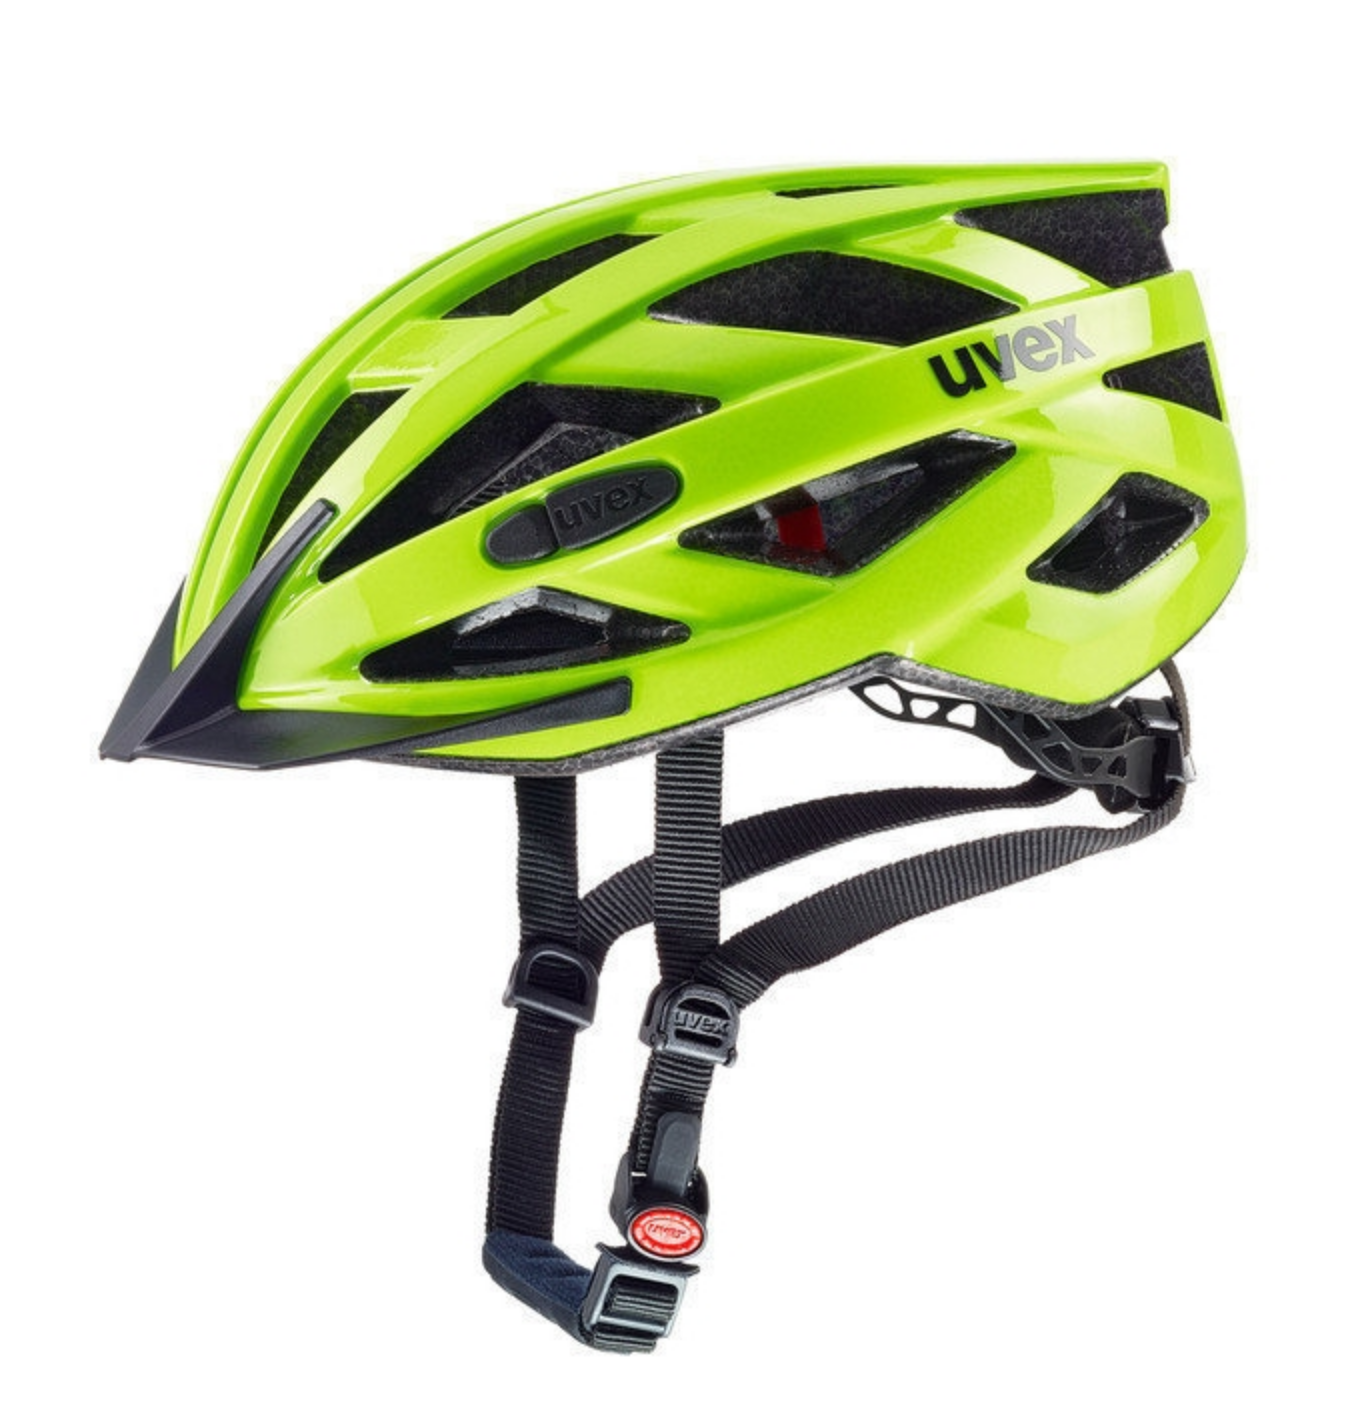 Kask rowerowy Uvex i-vo 3d